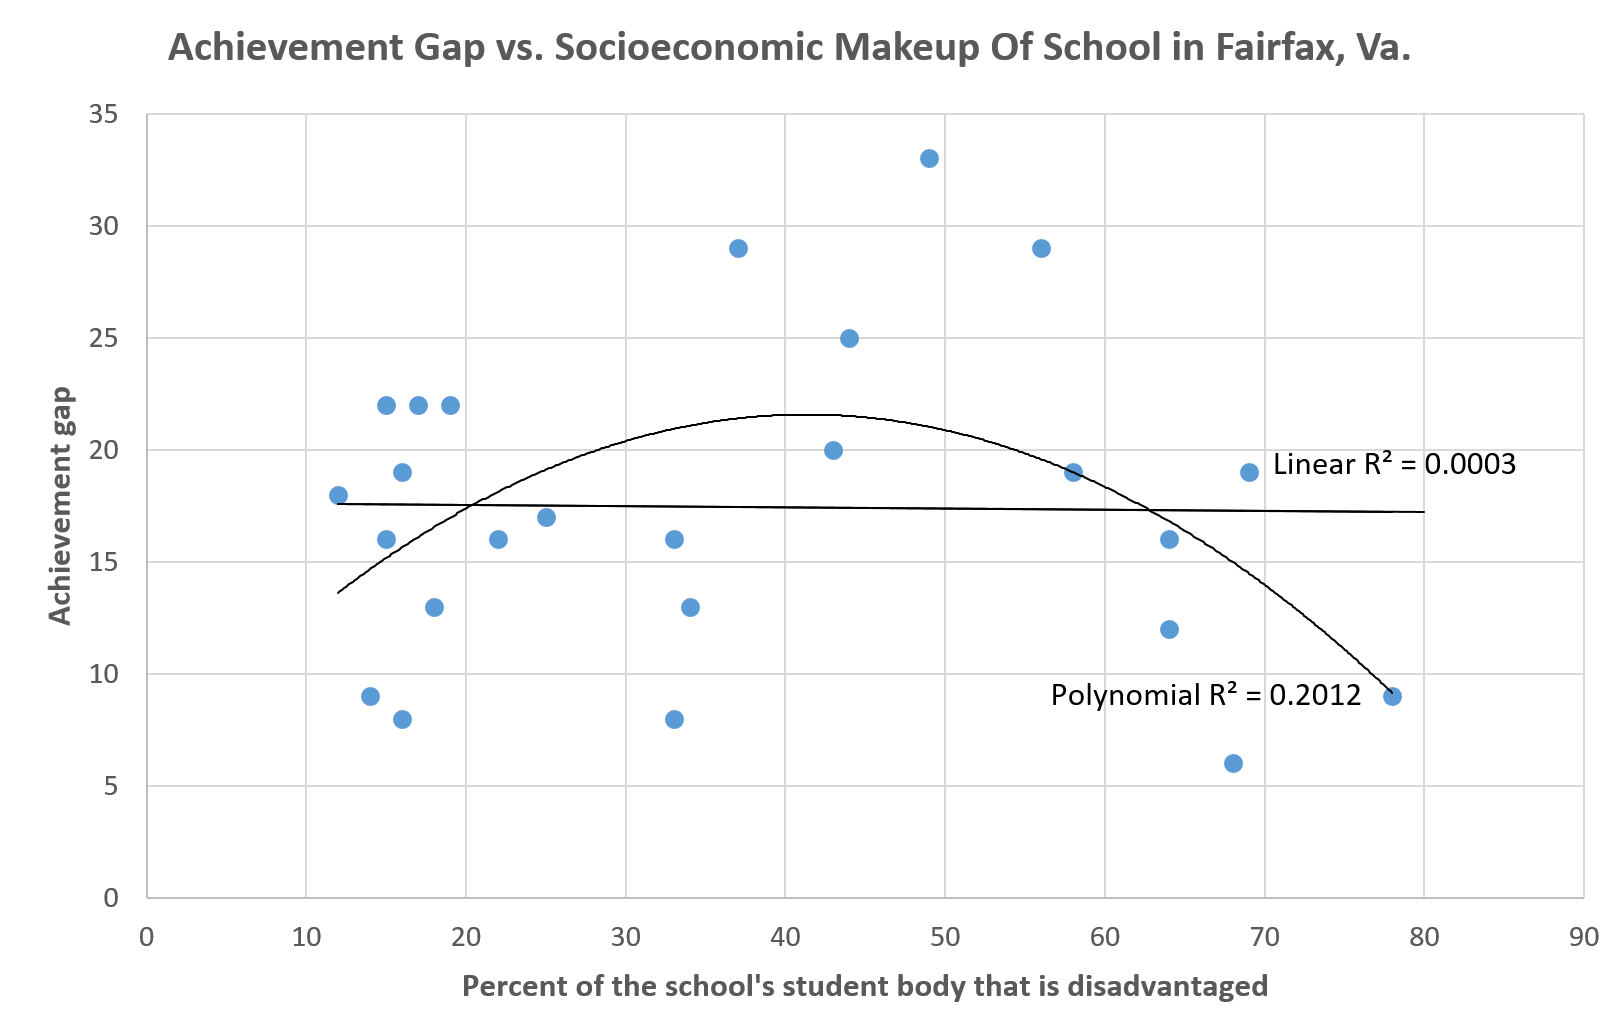 The "achievement gap" is not impacted by demographics in Fairfax, Va. / DCNF analysis of Virginia Dept. of Education data